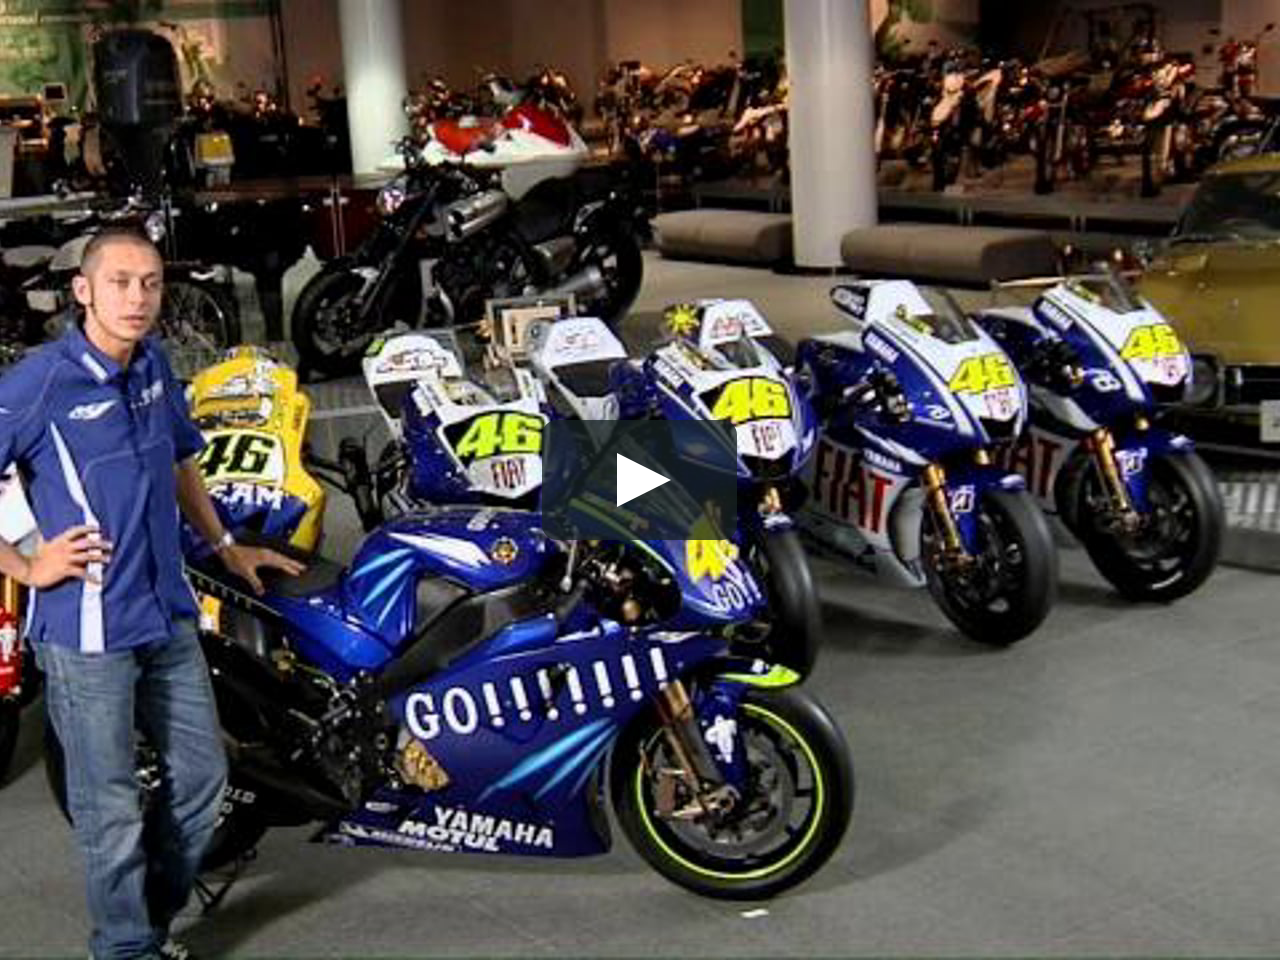 Valentino Rossi talks about the Yamaha M1 from 2004-2009 on Vimeo